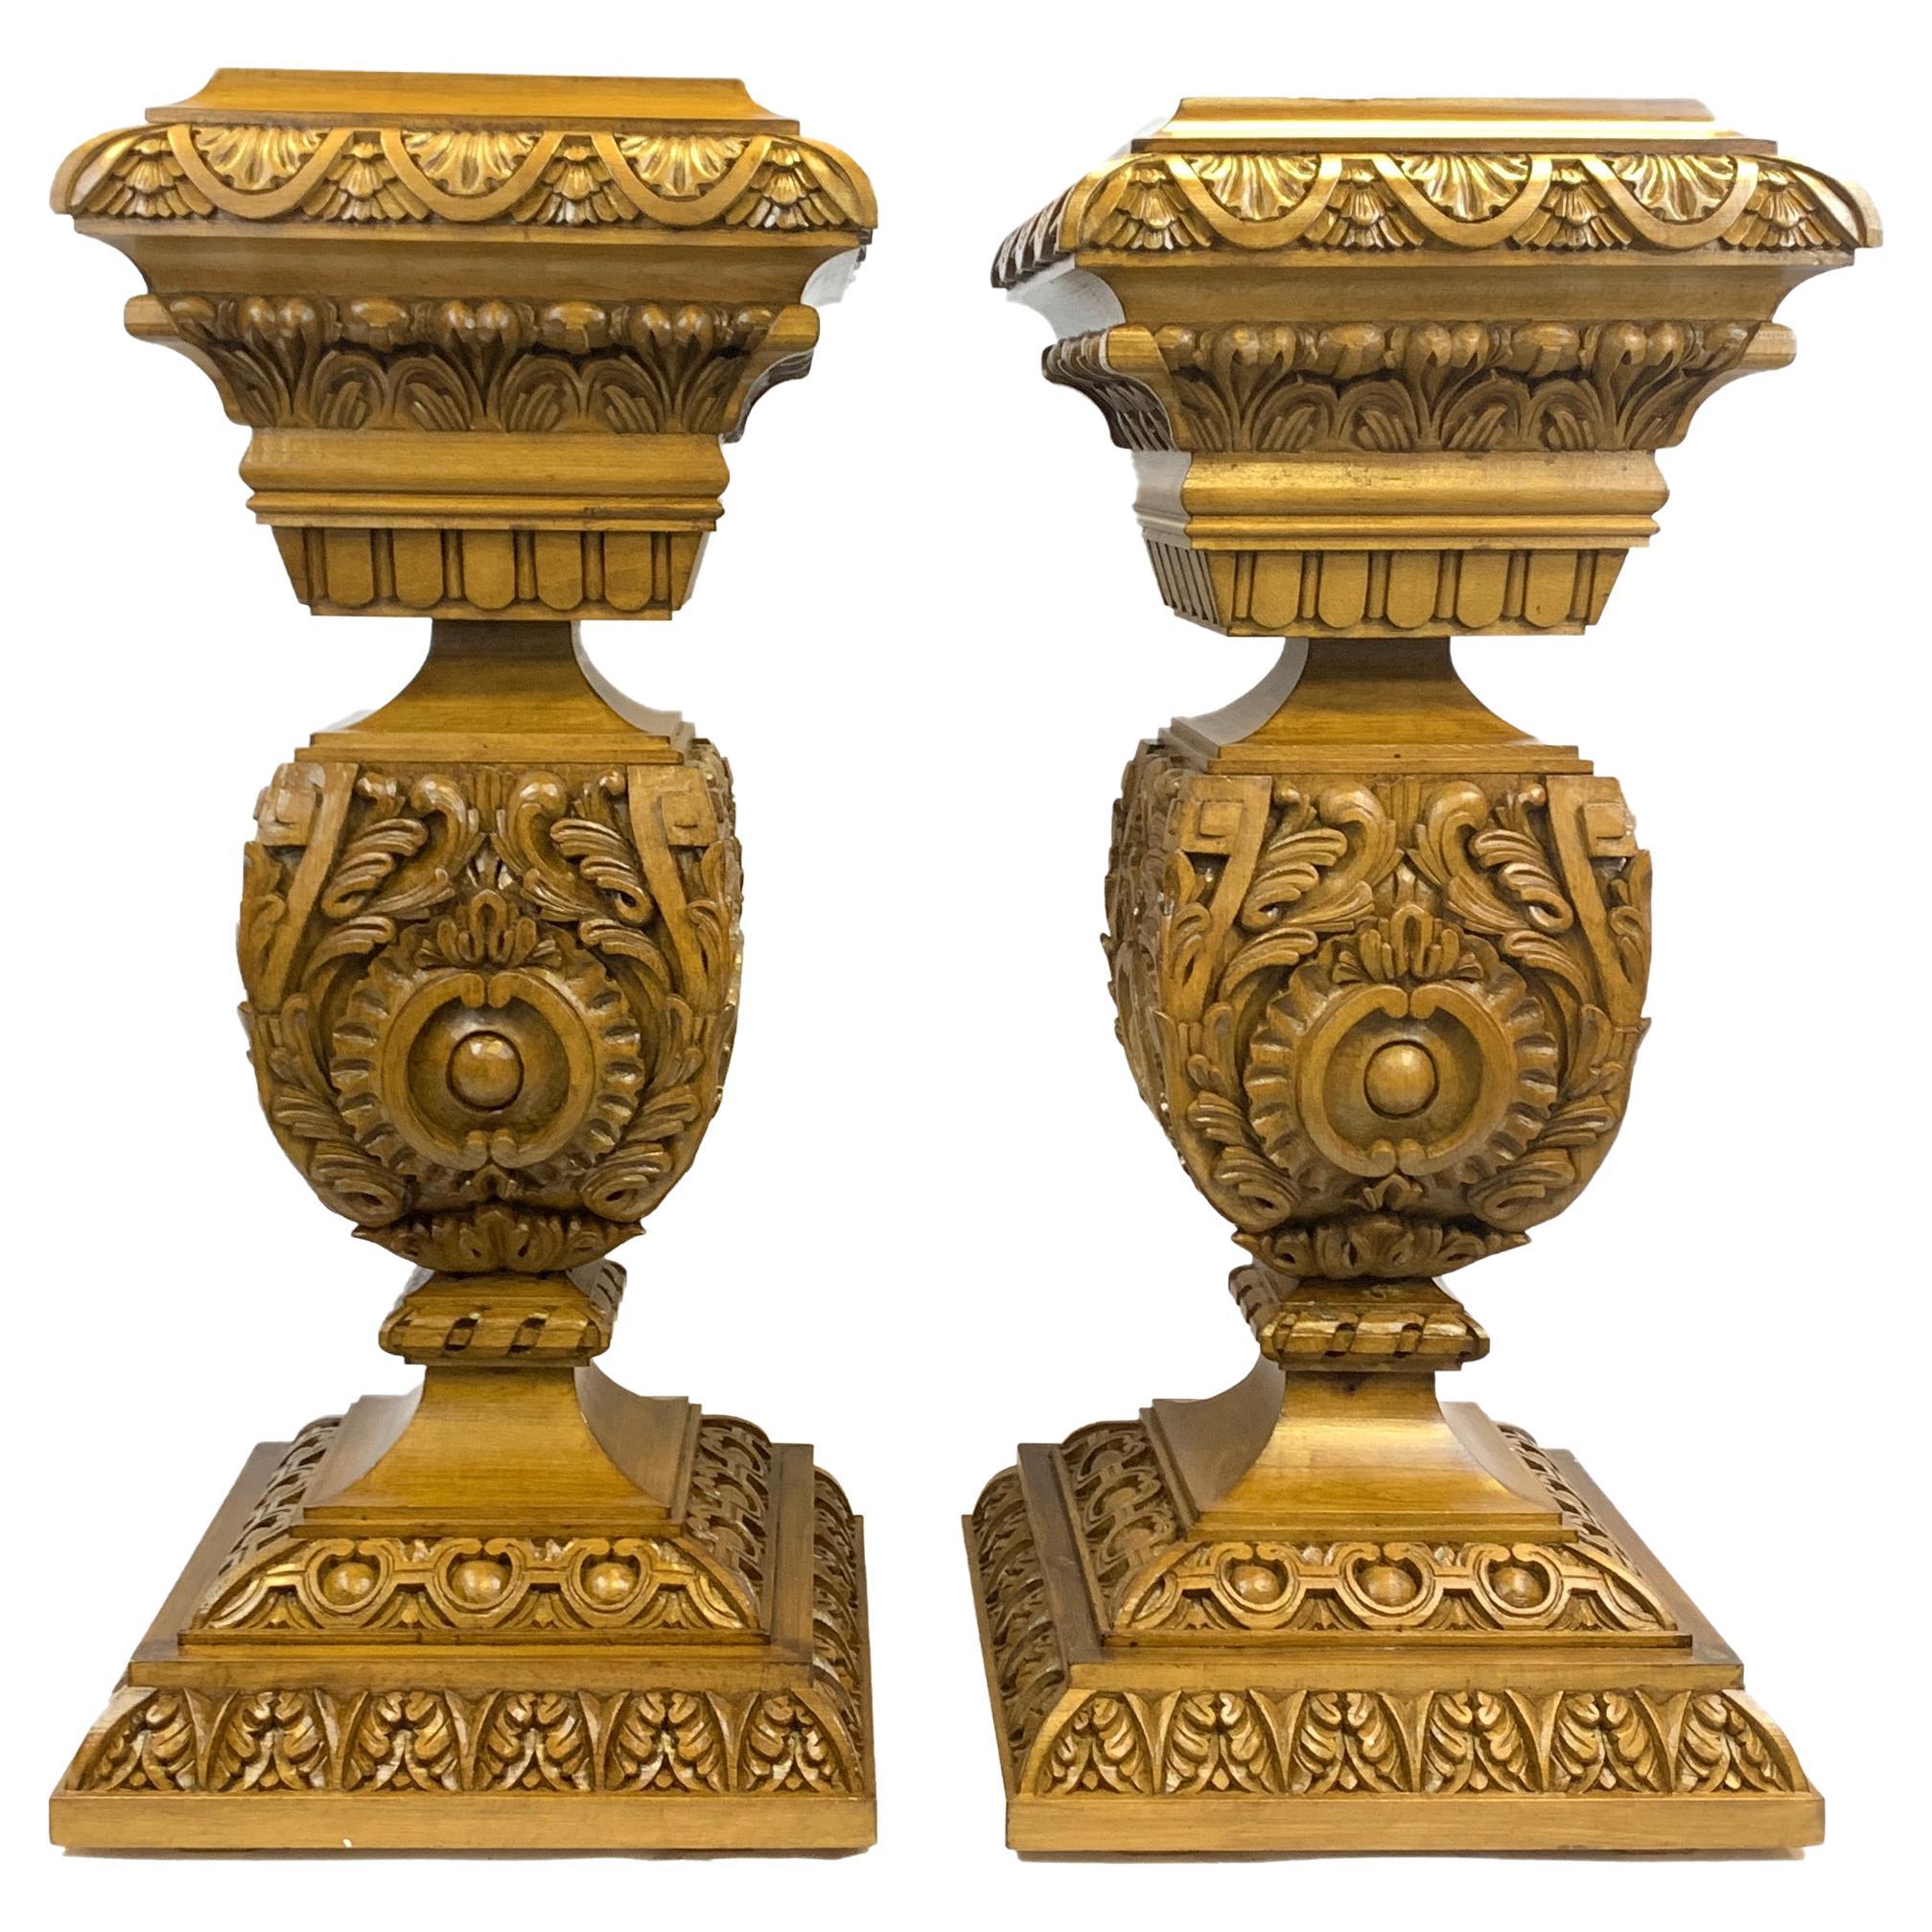 Pair of Heavily Carved Beech Wood Pedestals